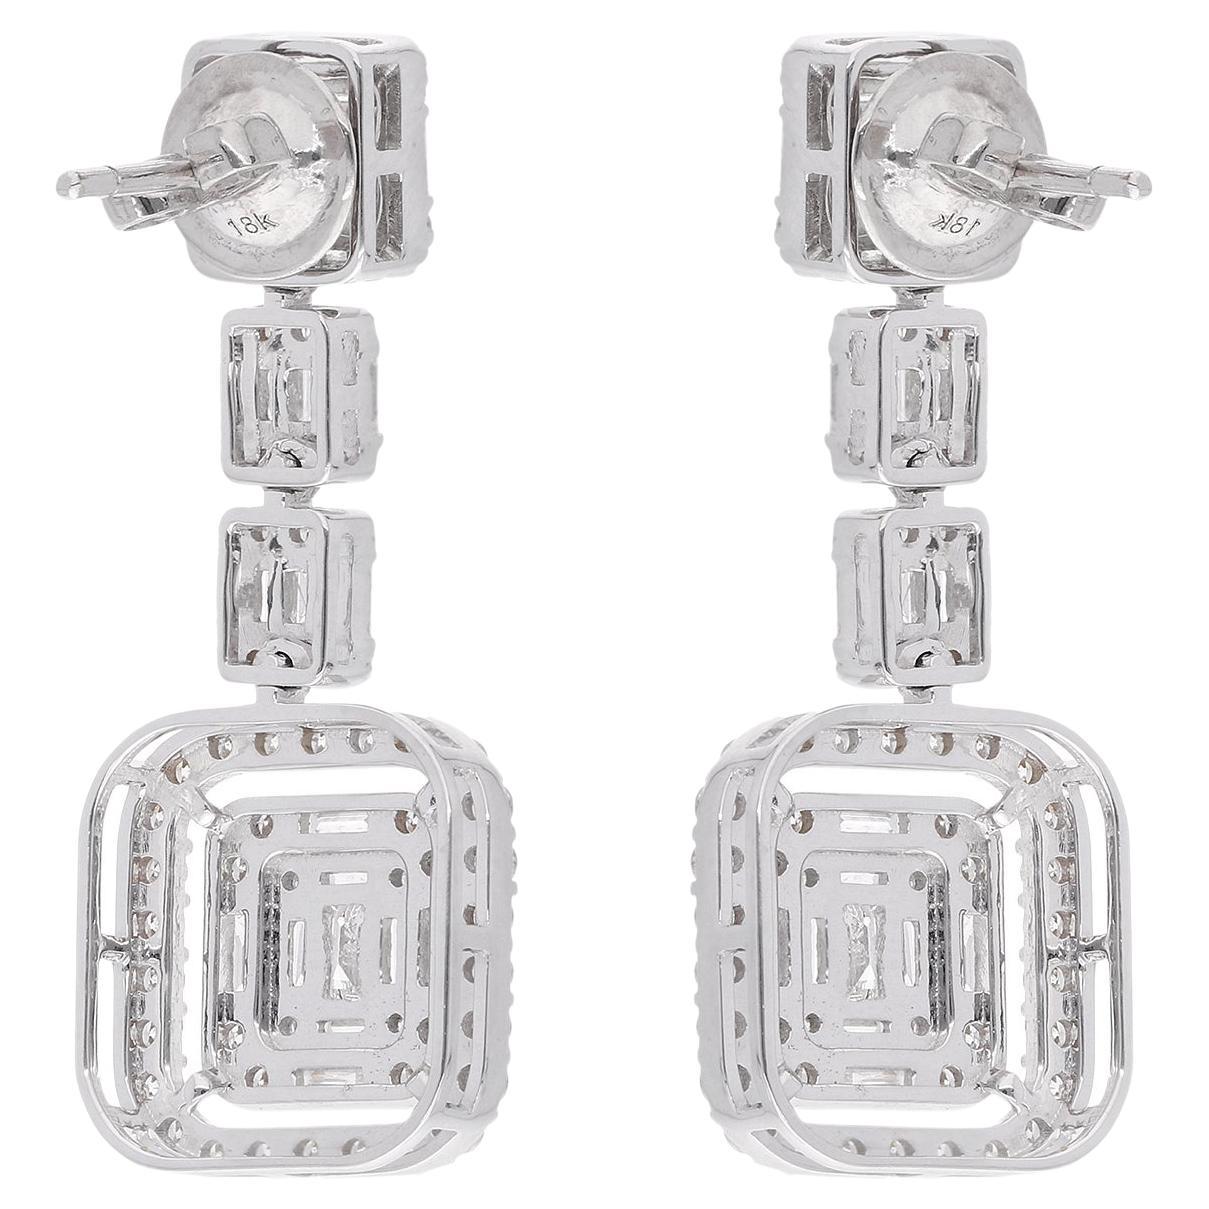 Indulge in the luxurious beauty of our handmade Diamond Earrings. These stunning earrings are meticulously crafted by skilled artisans to create a one-of-a-kind piece of jewelry that is as unique as it is beautiful. These earrings are available in